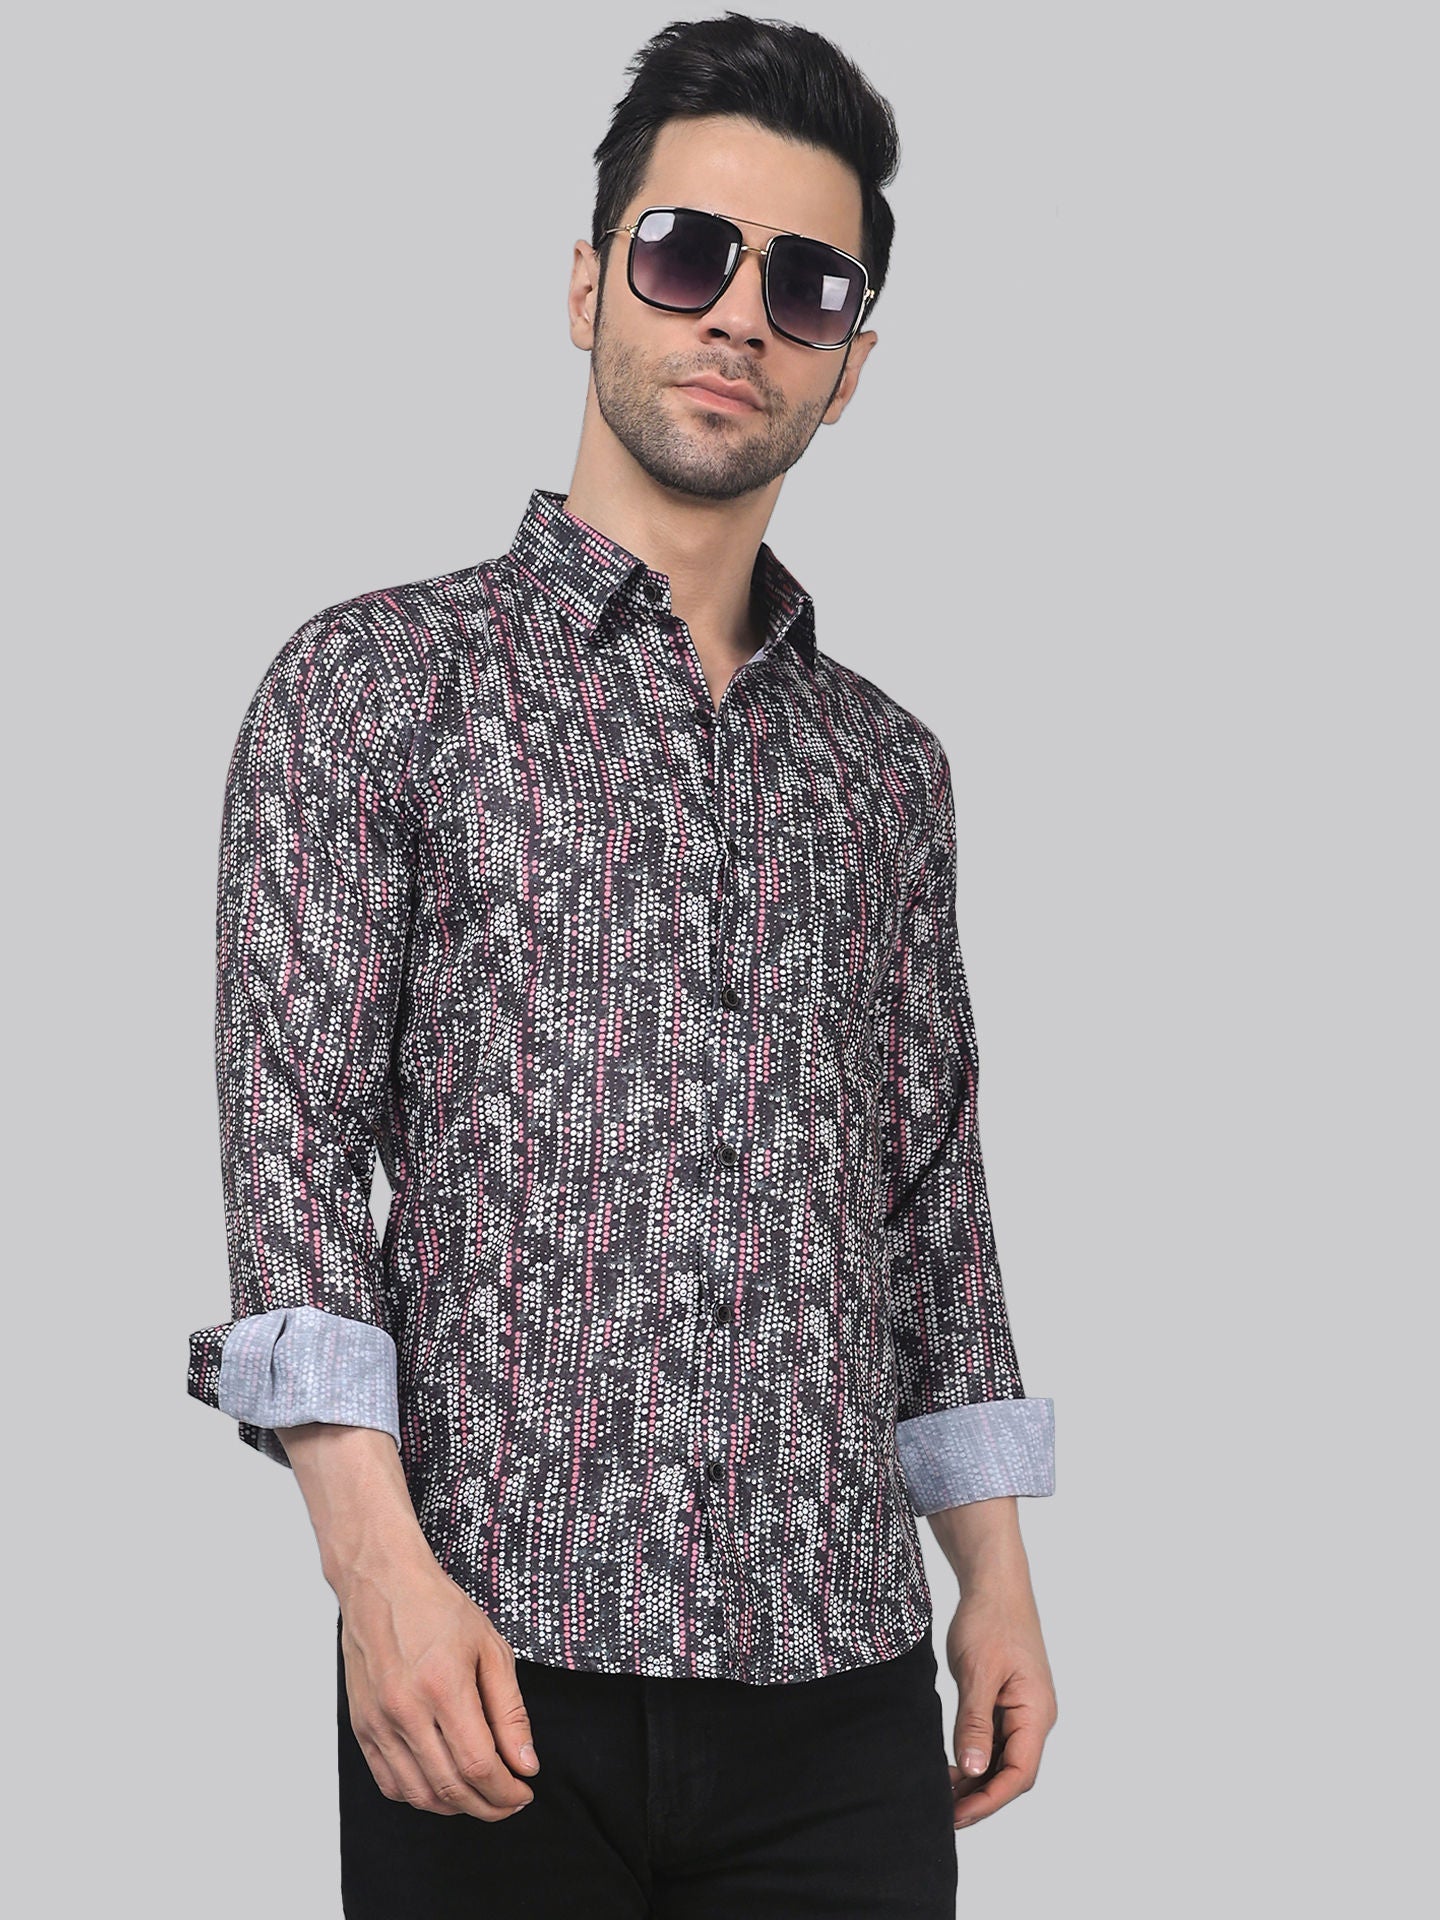 TryBuy Luxe Men's Linen Casual Printed Full Sleeves Shirt - TryBuy® USA🇺🇸